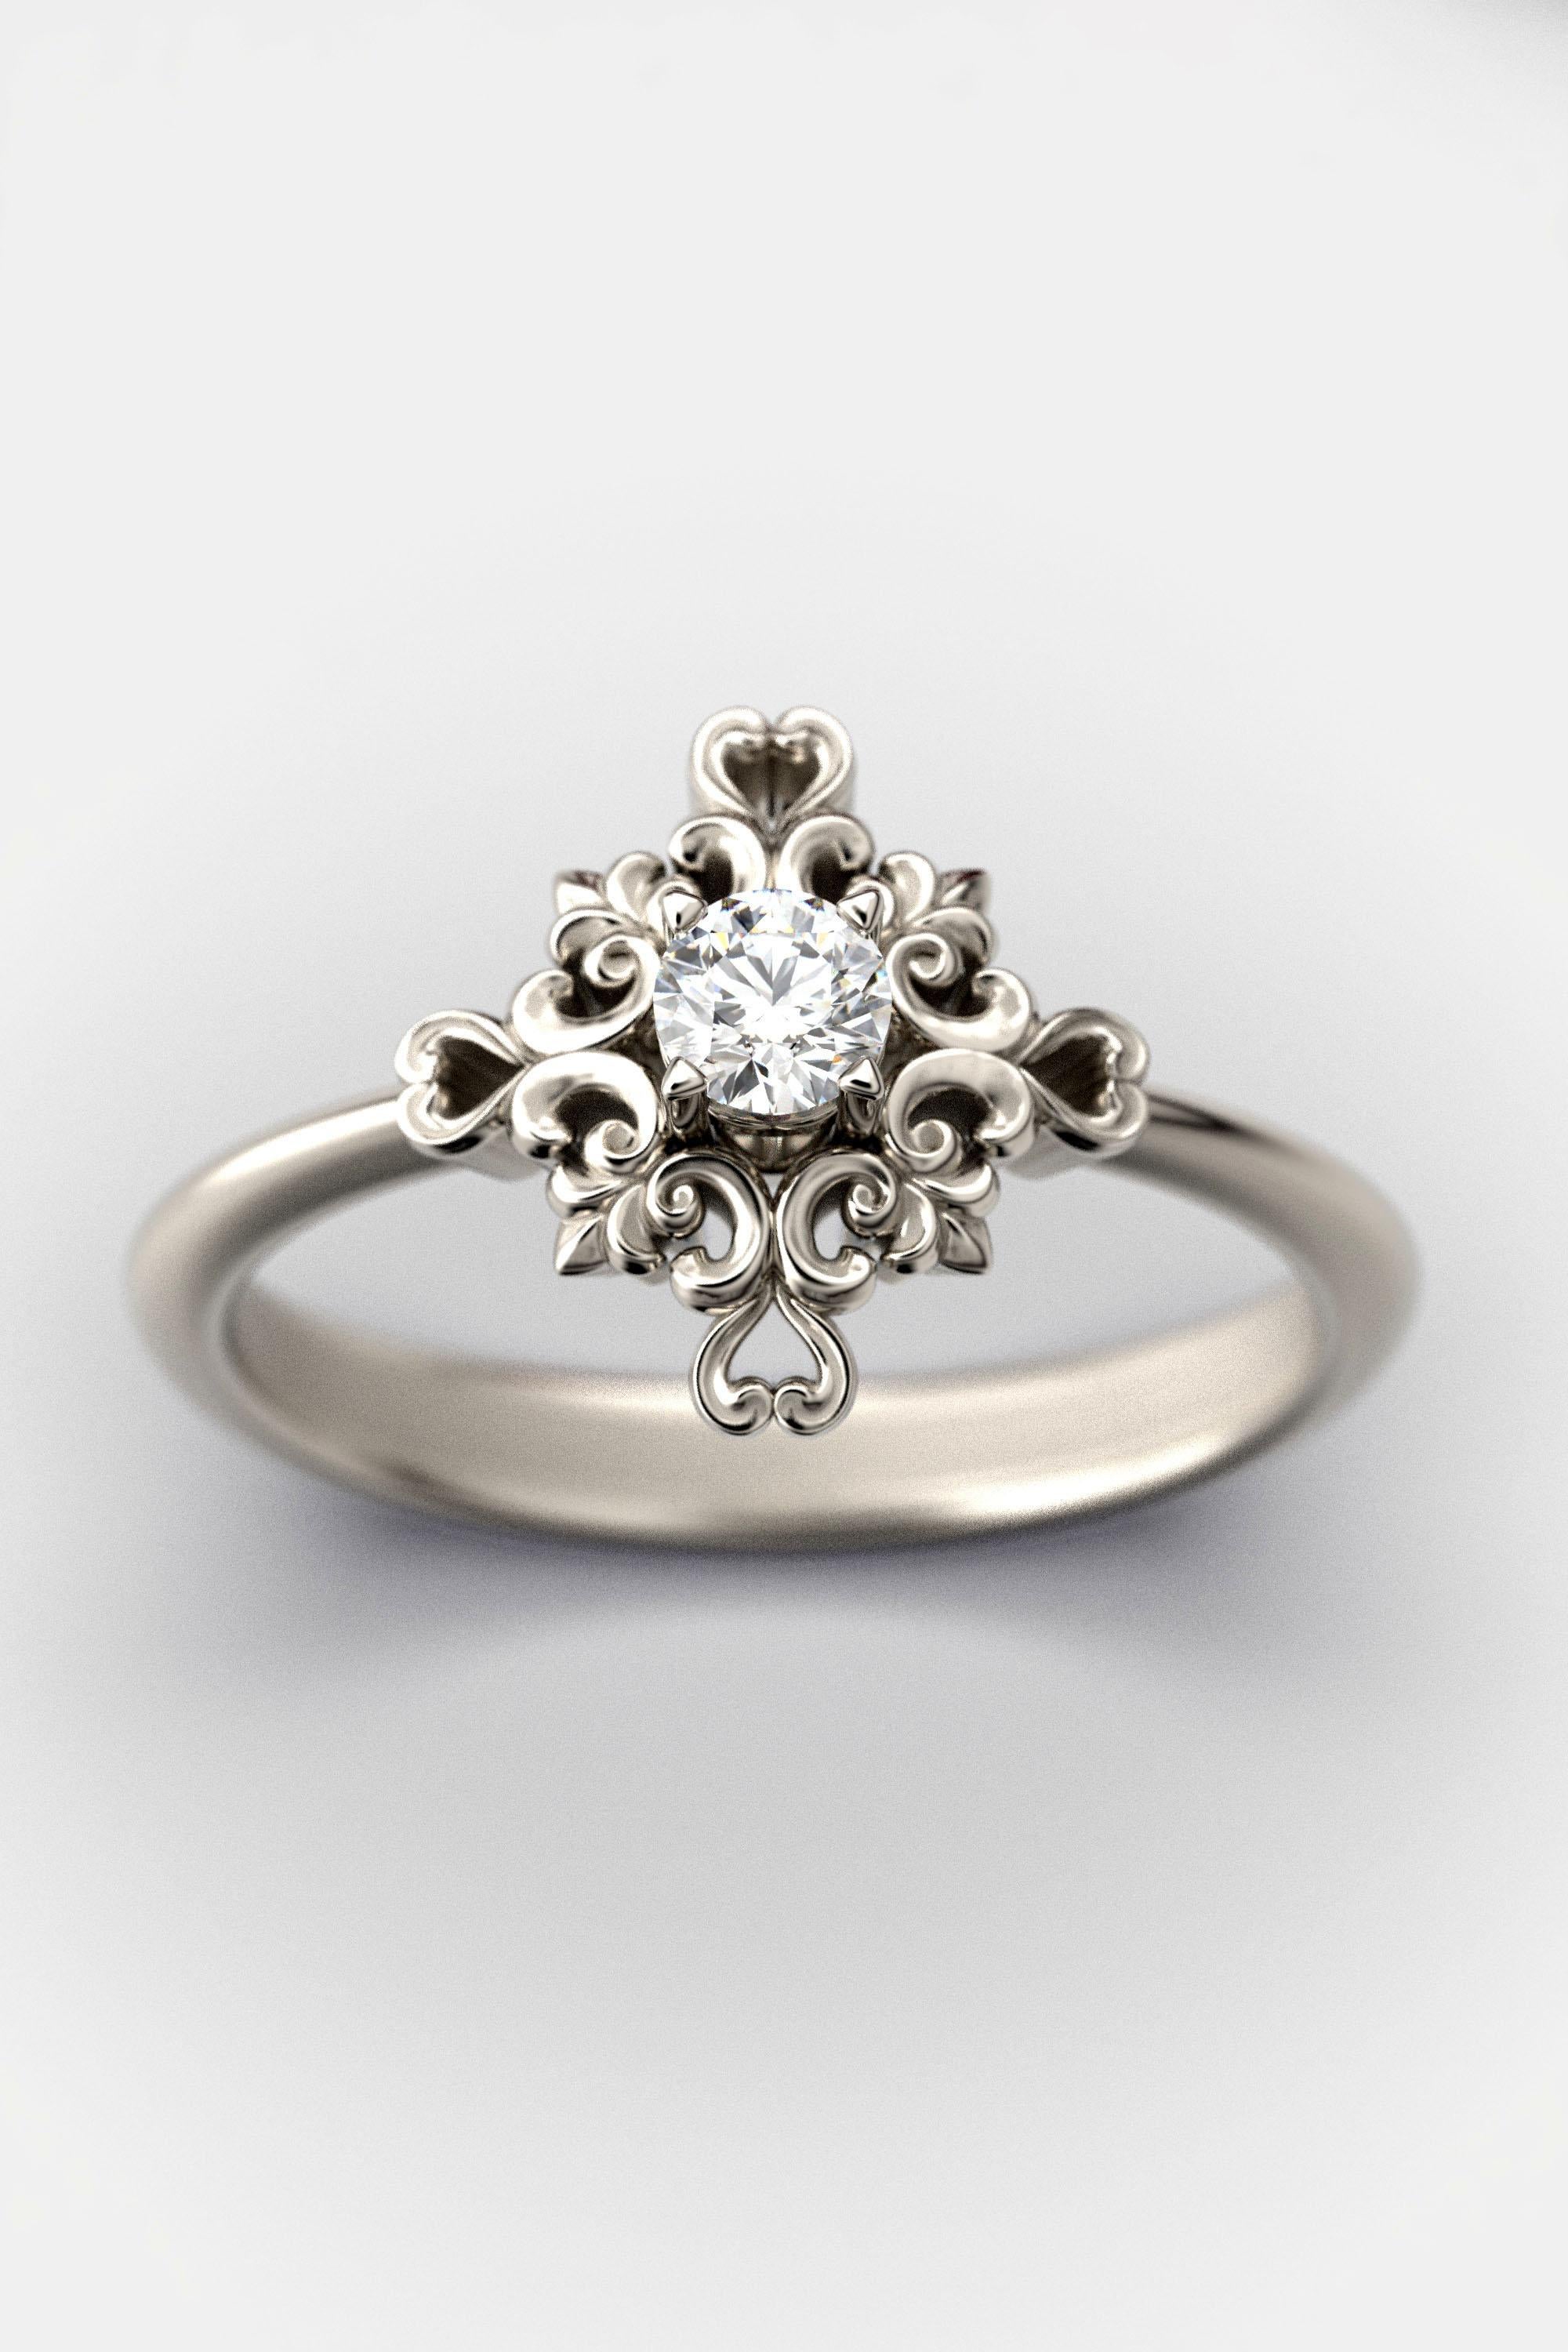 For Sale:  Italian Diamond Engagement Ring with Baroque Setting 18k gold 10